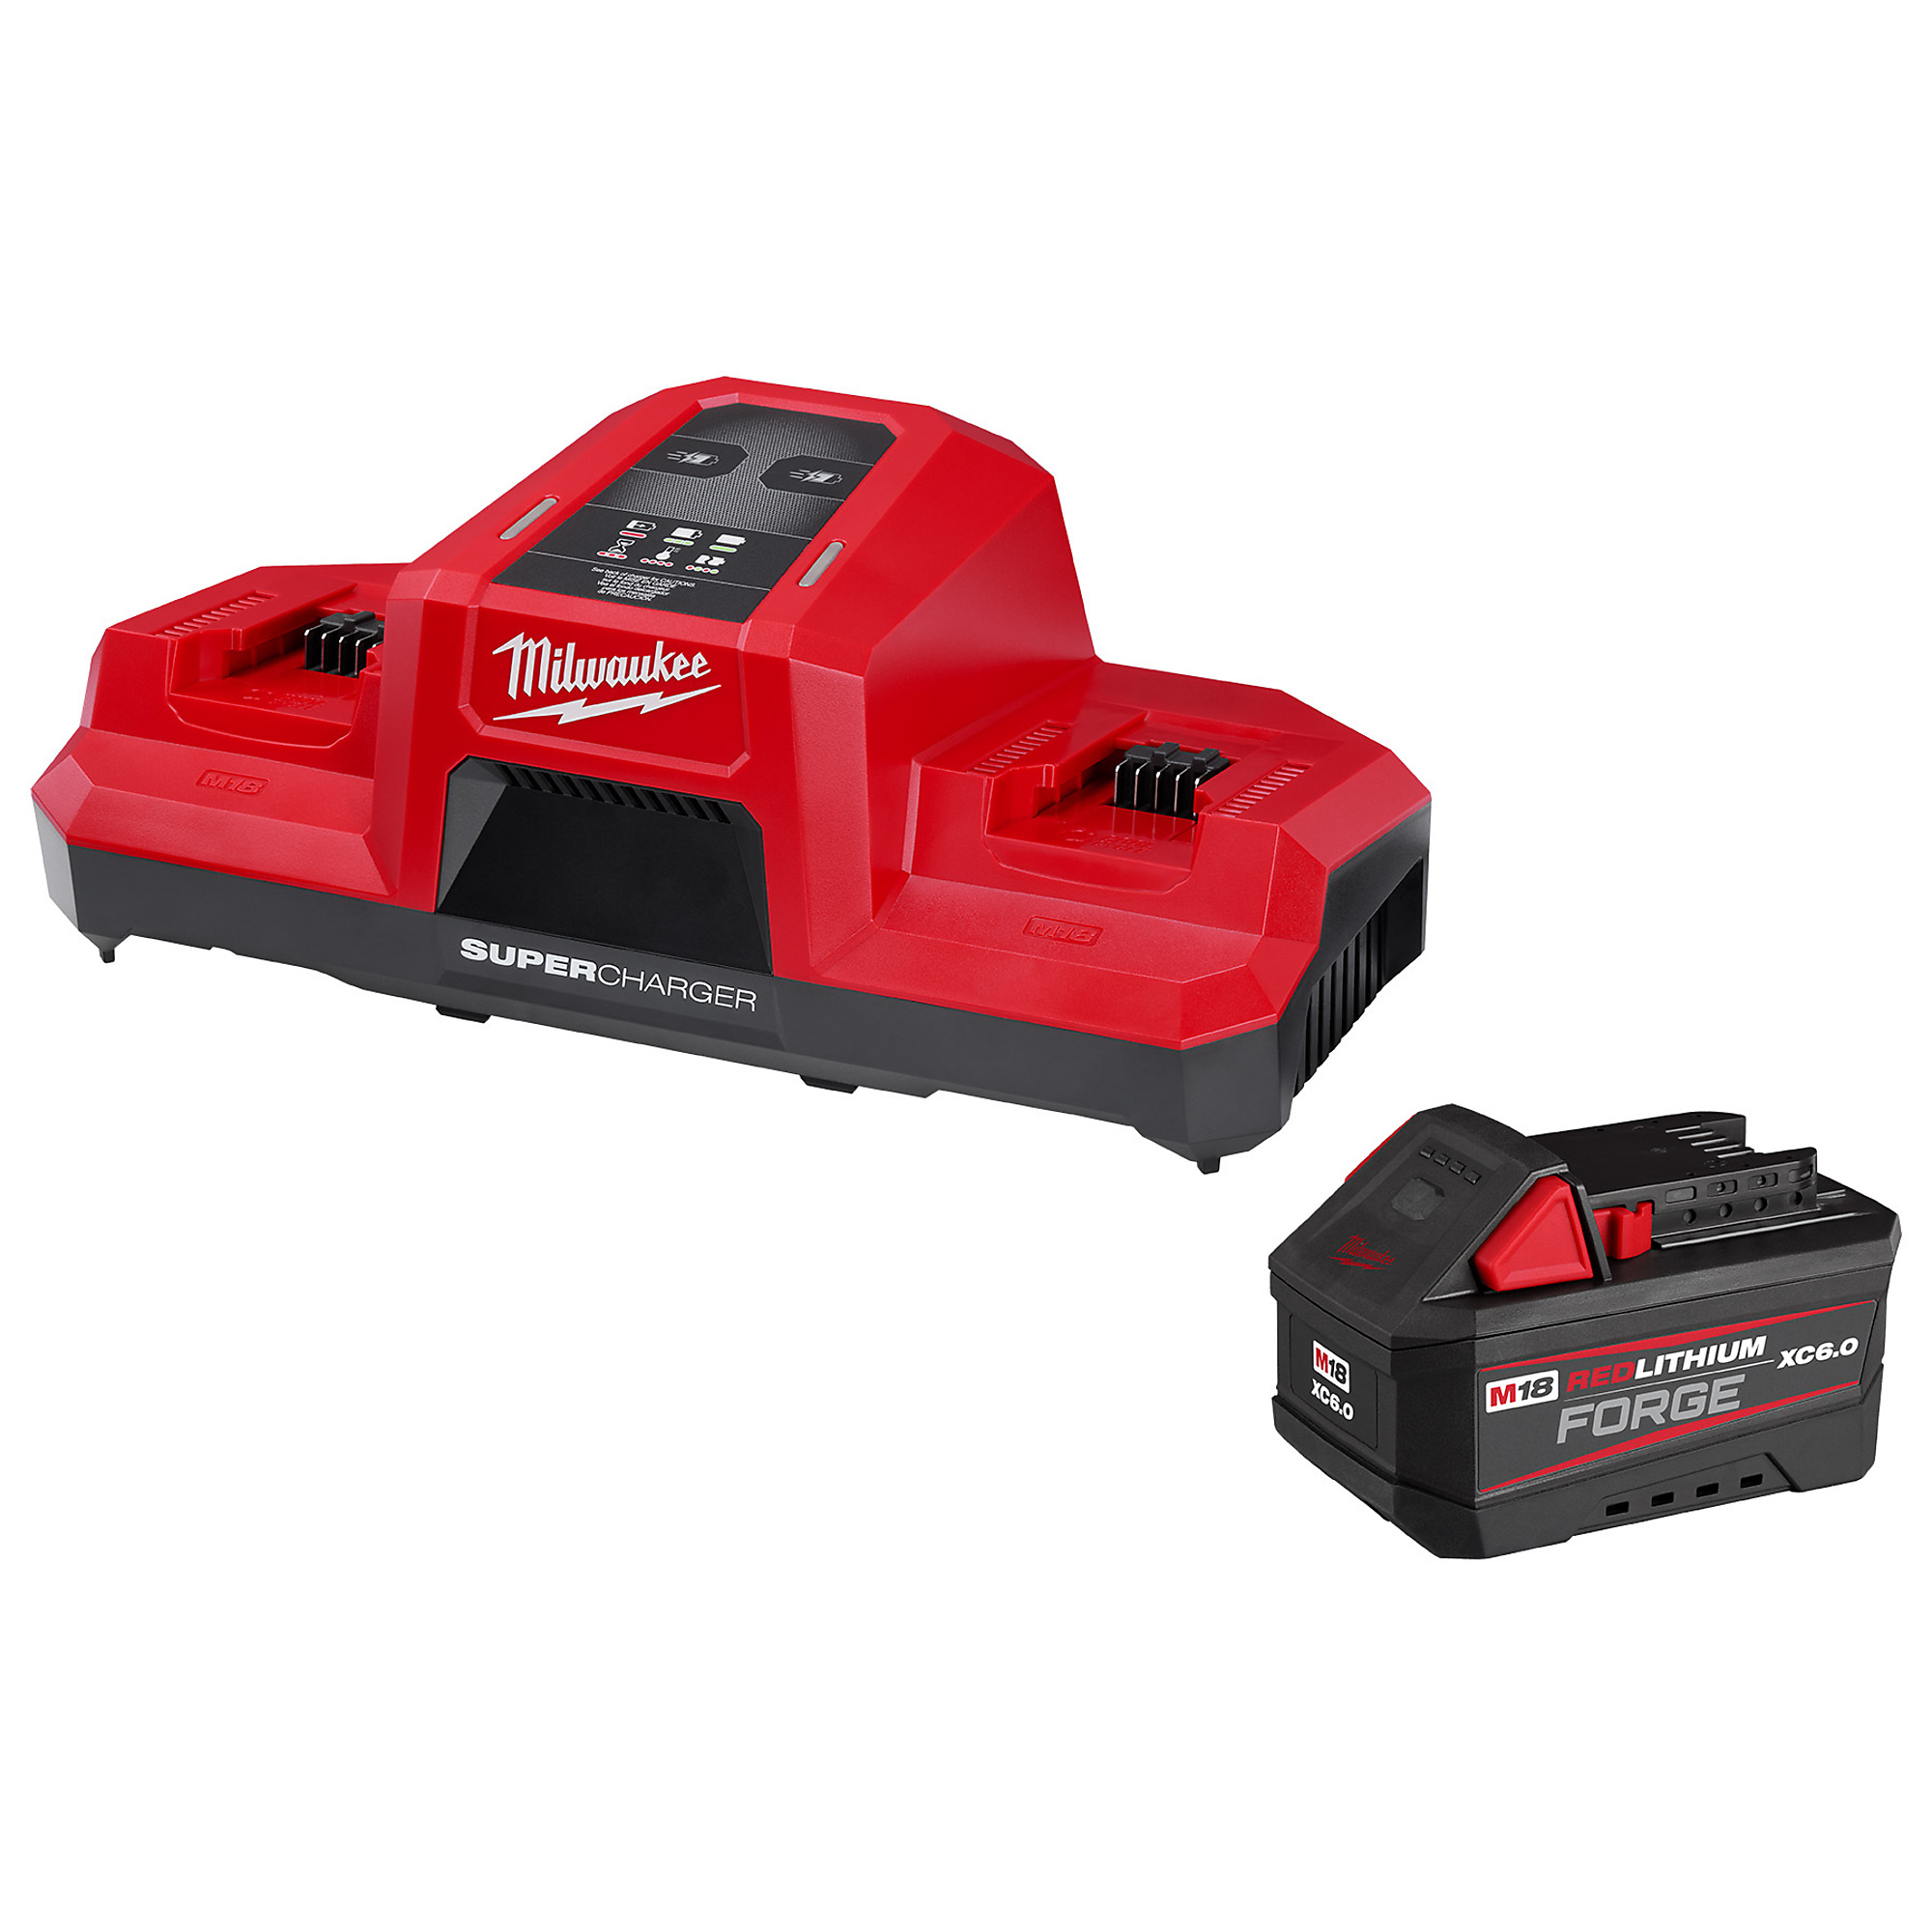 Milwaukee, M18 Forge 6.0 Starter Kit, Volts 18, Battery Type Lithium-ion,  Model# 48-59-1861